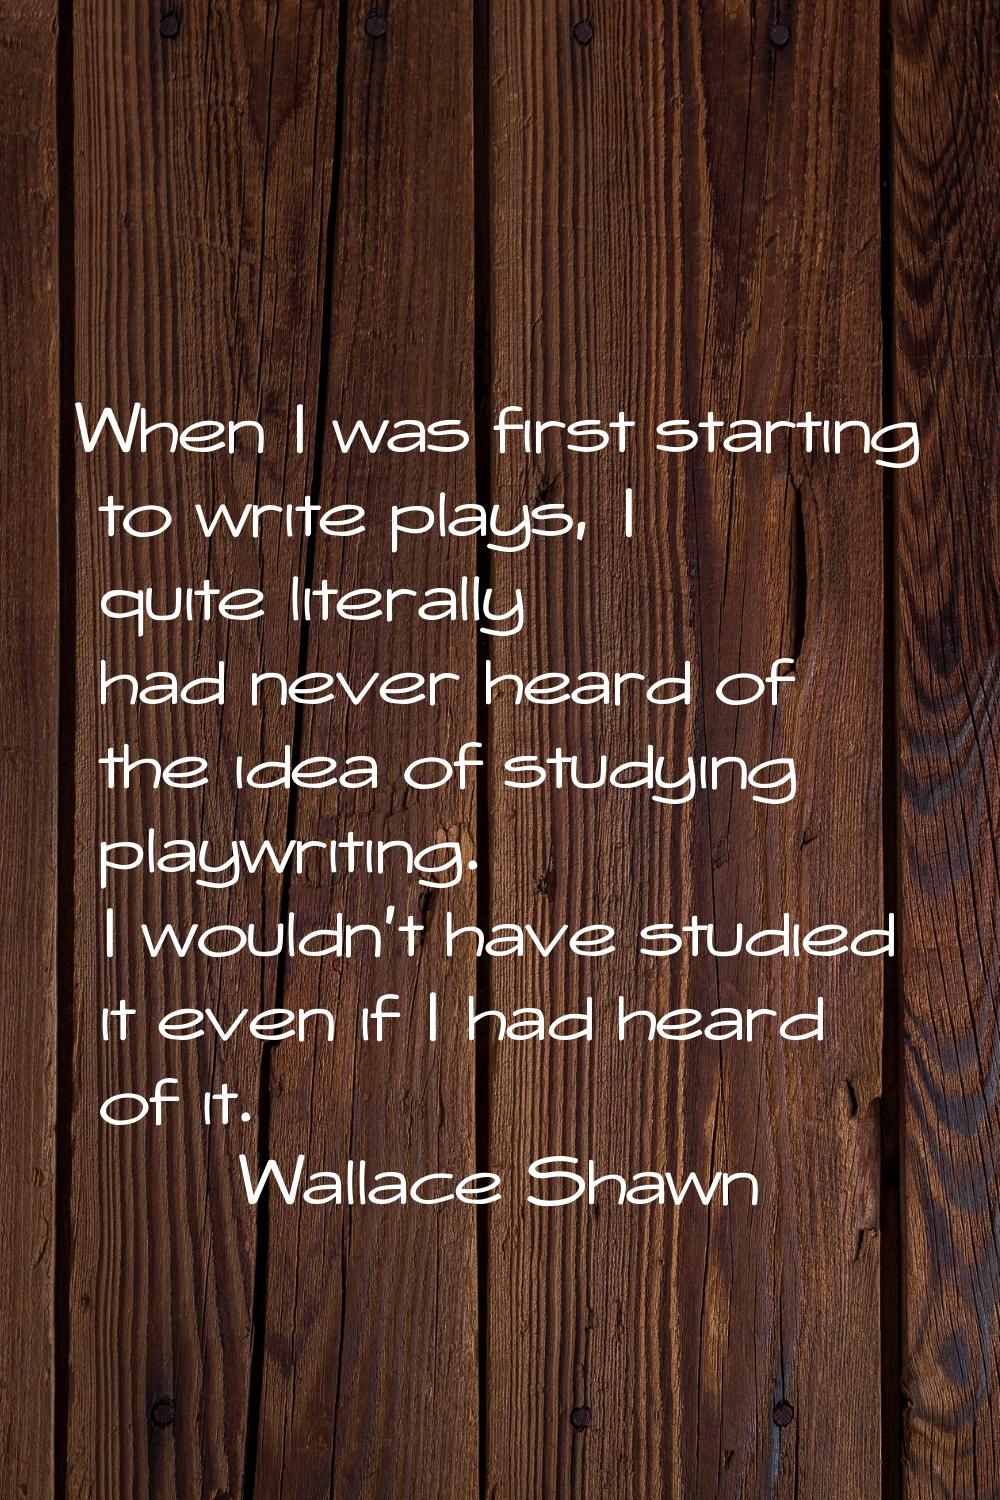 When I was first starting to write plays, I quite literally had never heard of the idea of studying